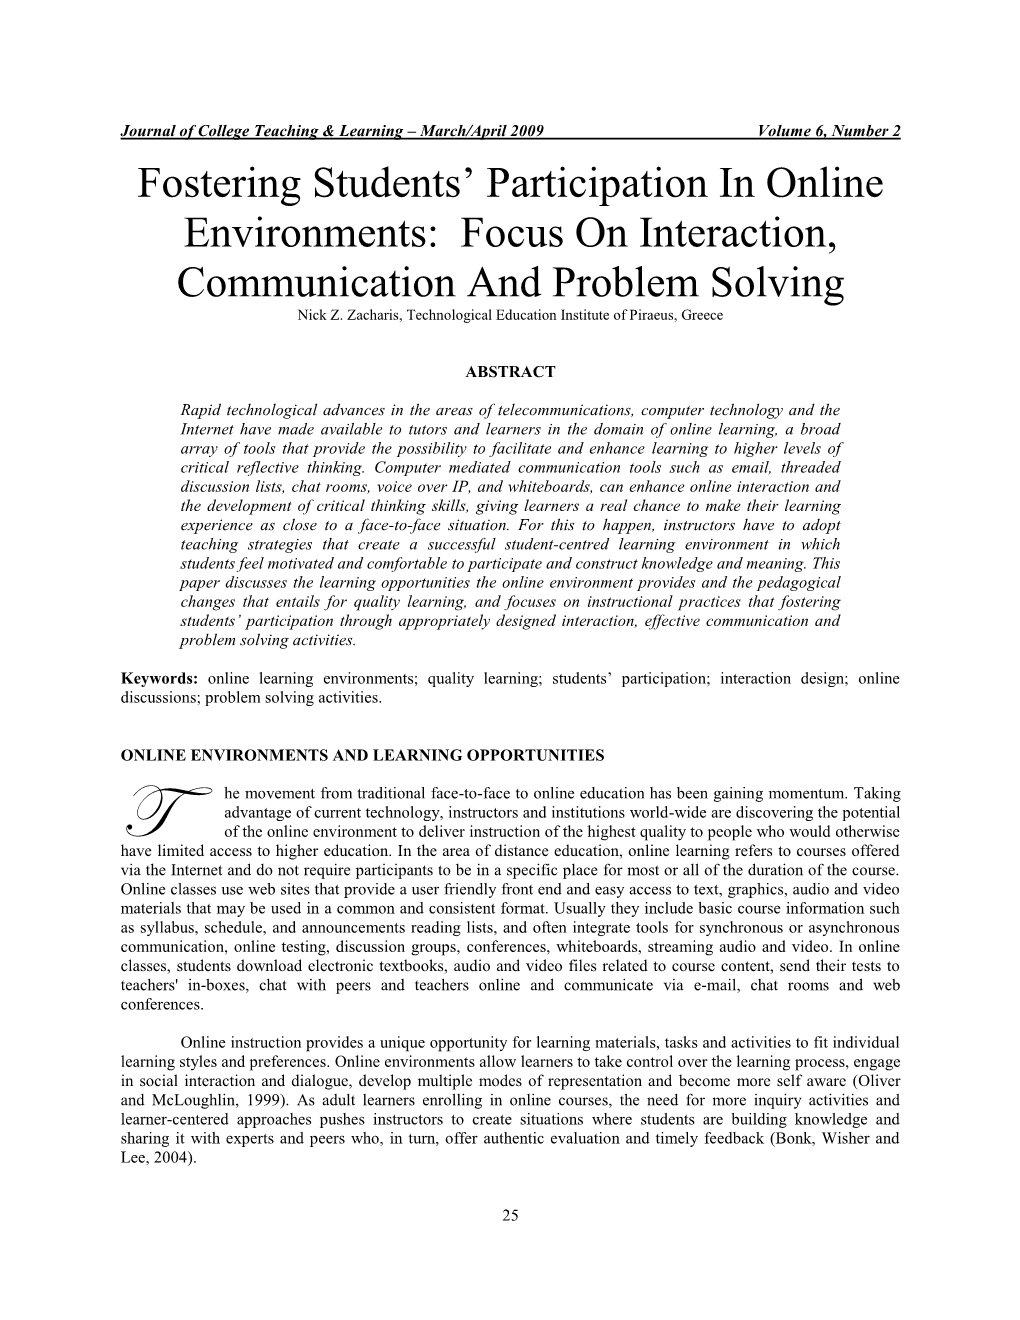 Fostering Students' Participation in Online Environments: Focus on Interaction, Communication and Problem Solving